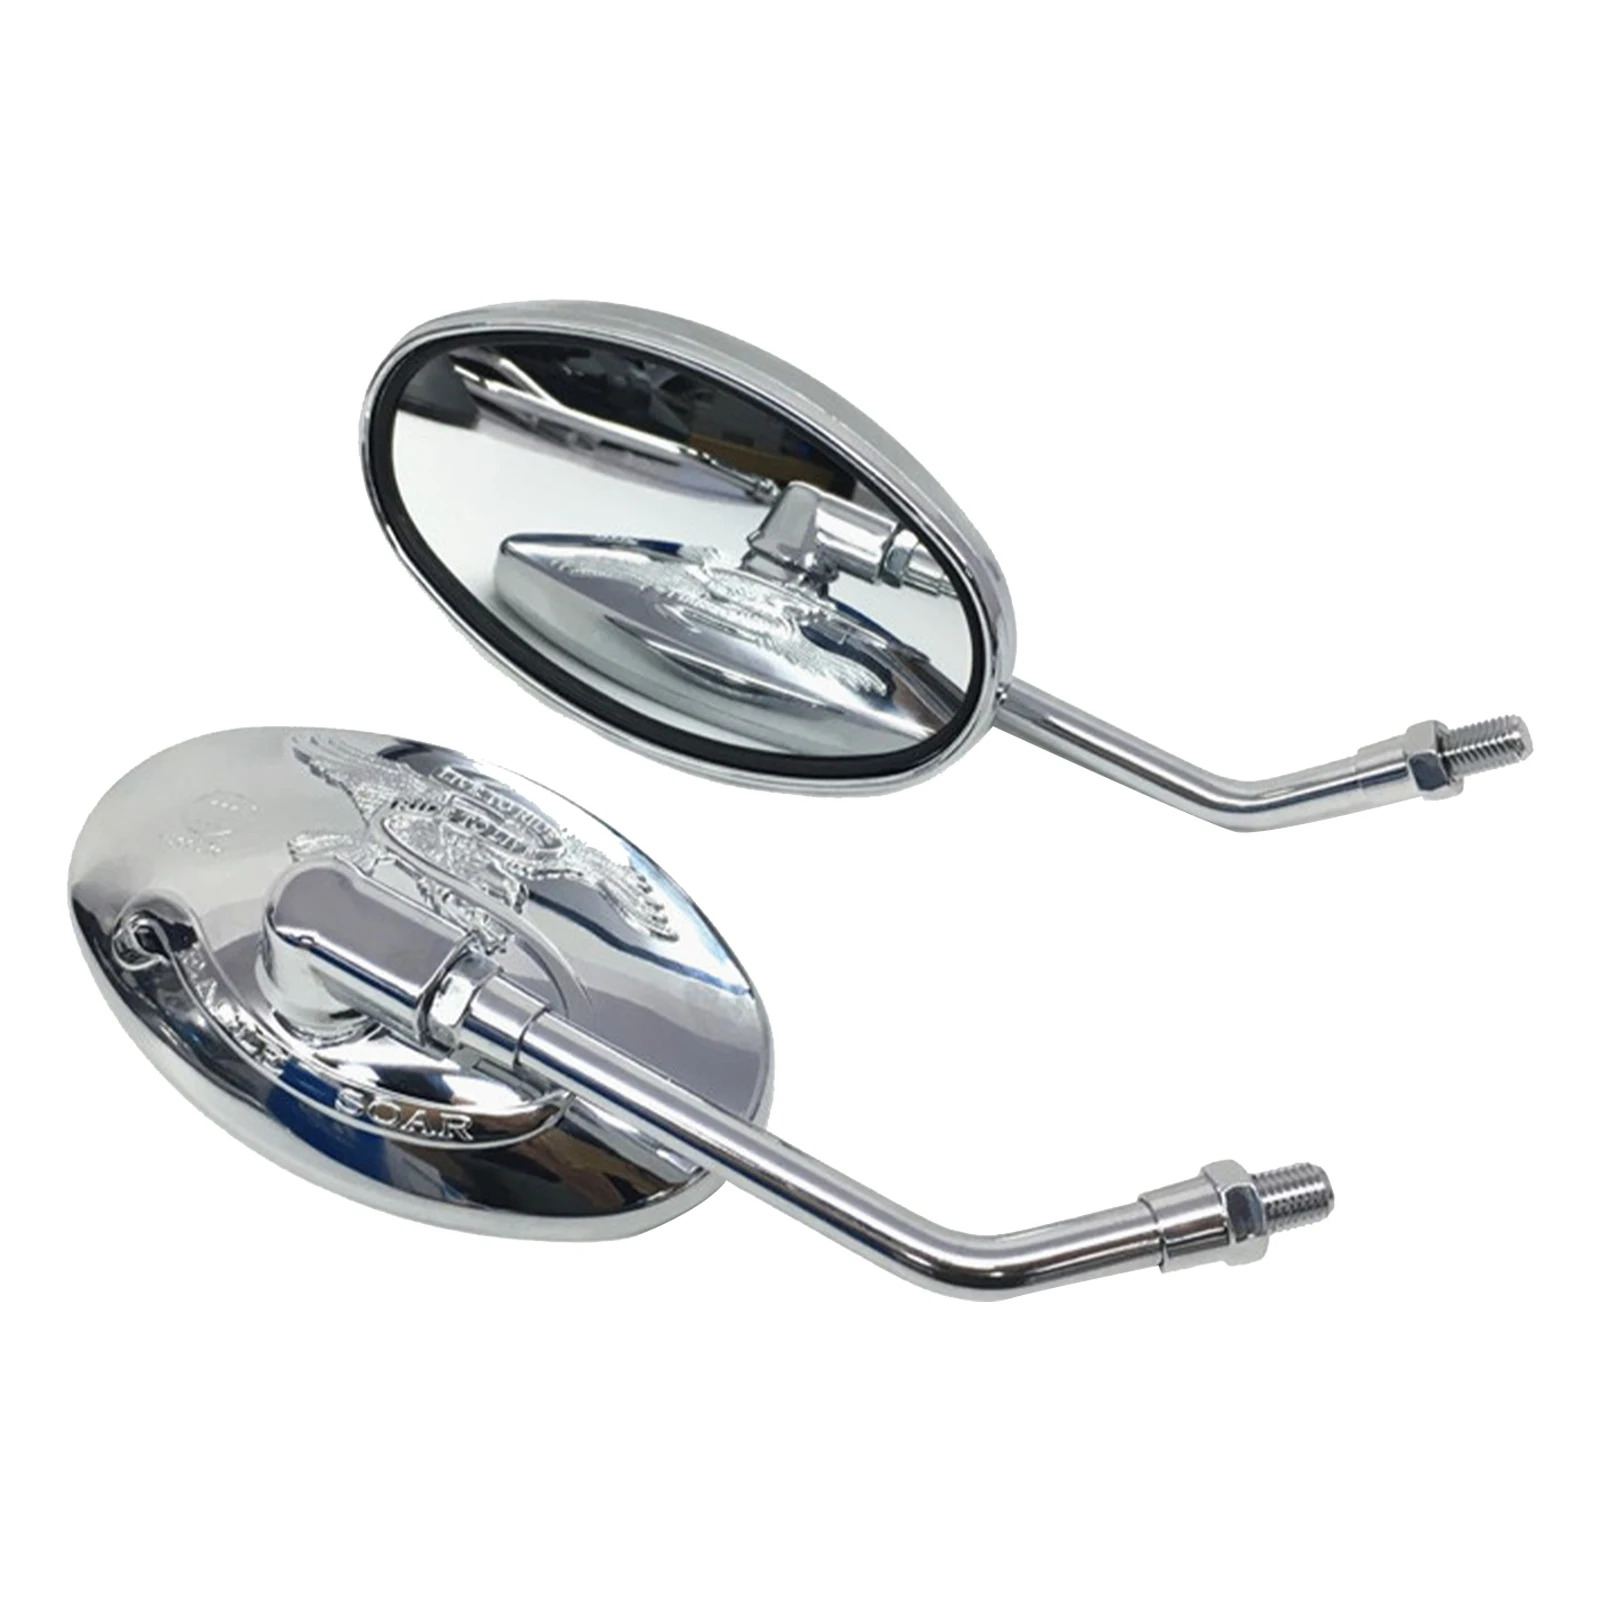 Universal Motorcycle Oval Chrome Rearview Mirrors 10MM Motorbike Side Mirror FOR Yamaha xt 600 virago 125 535 1100 vmax 1200